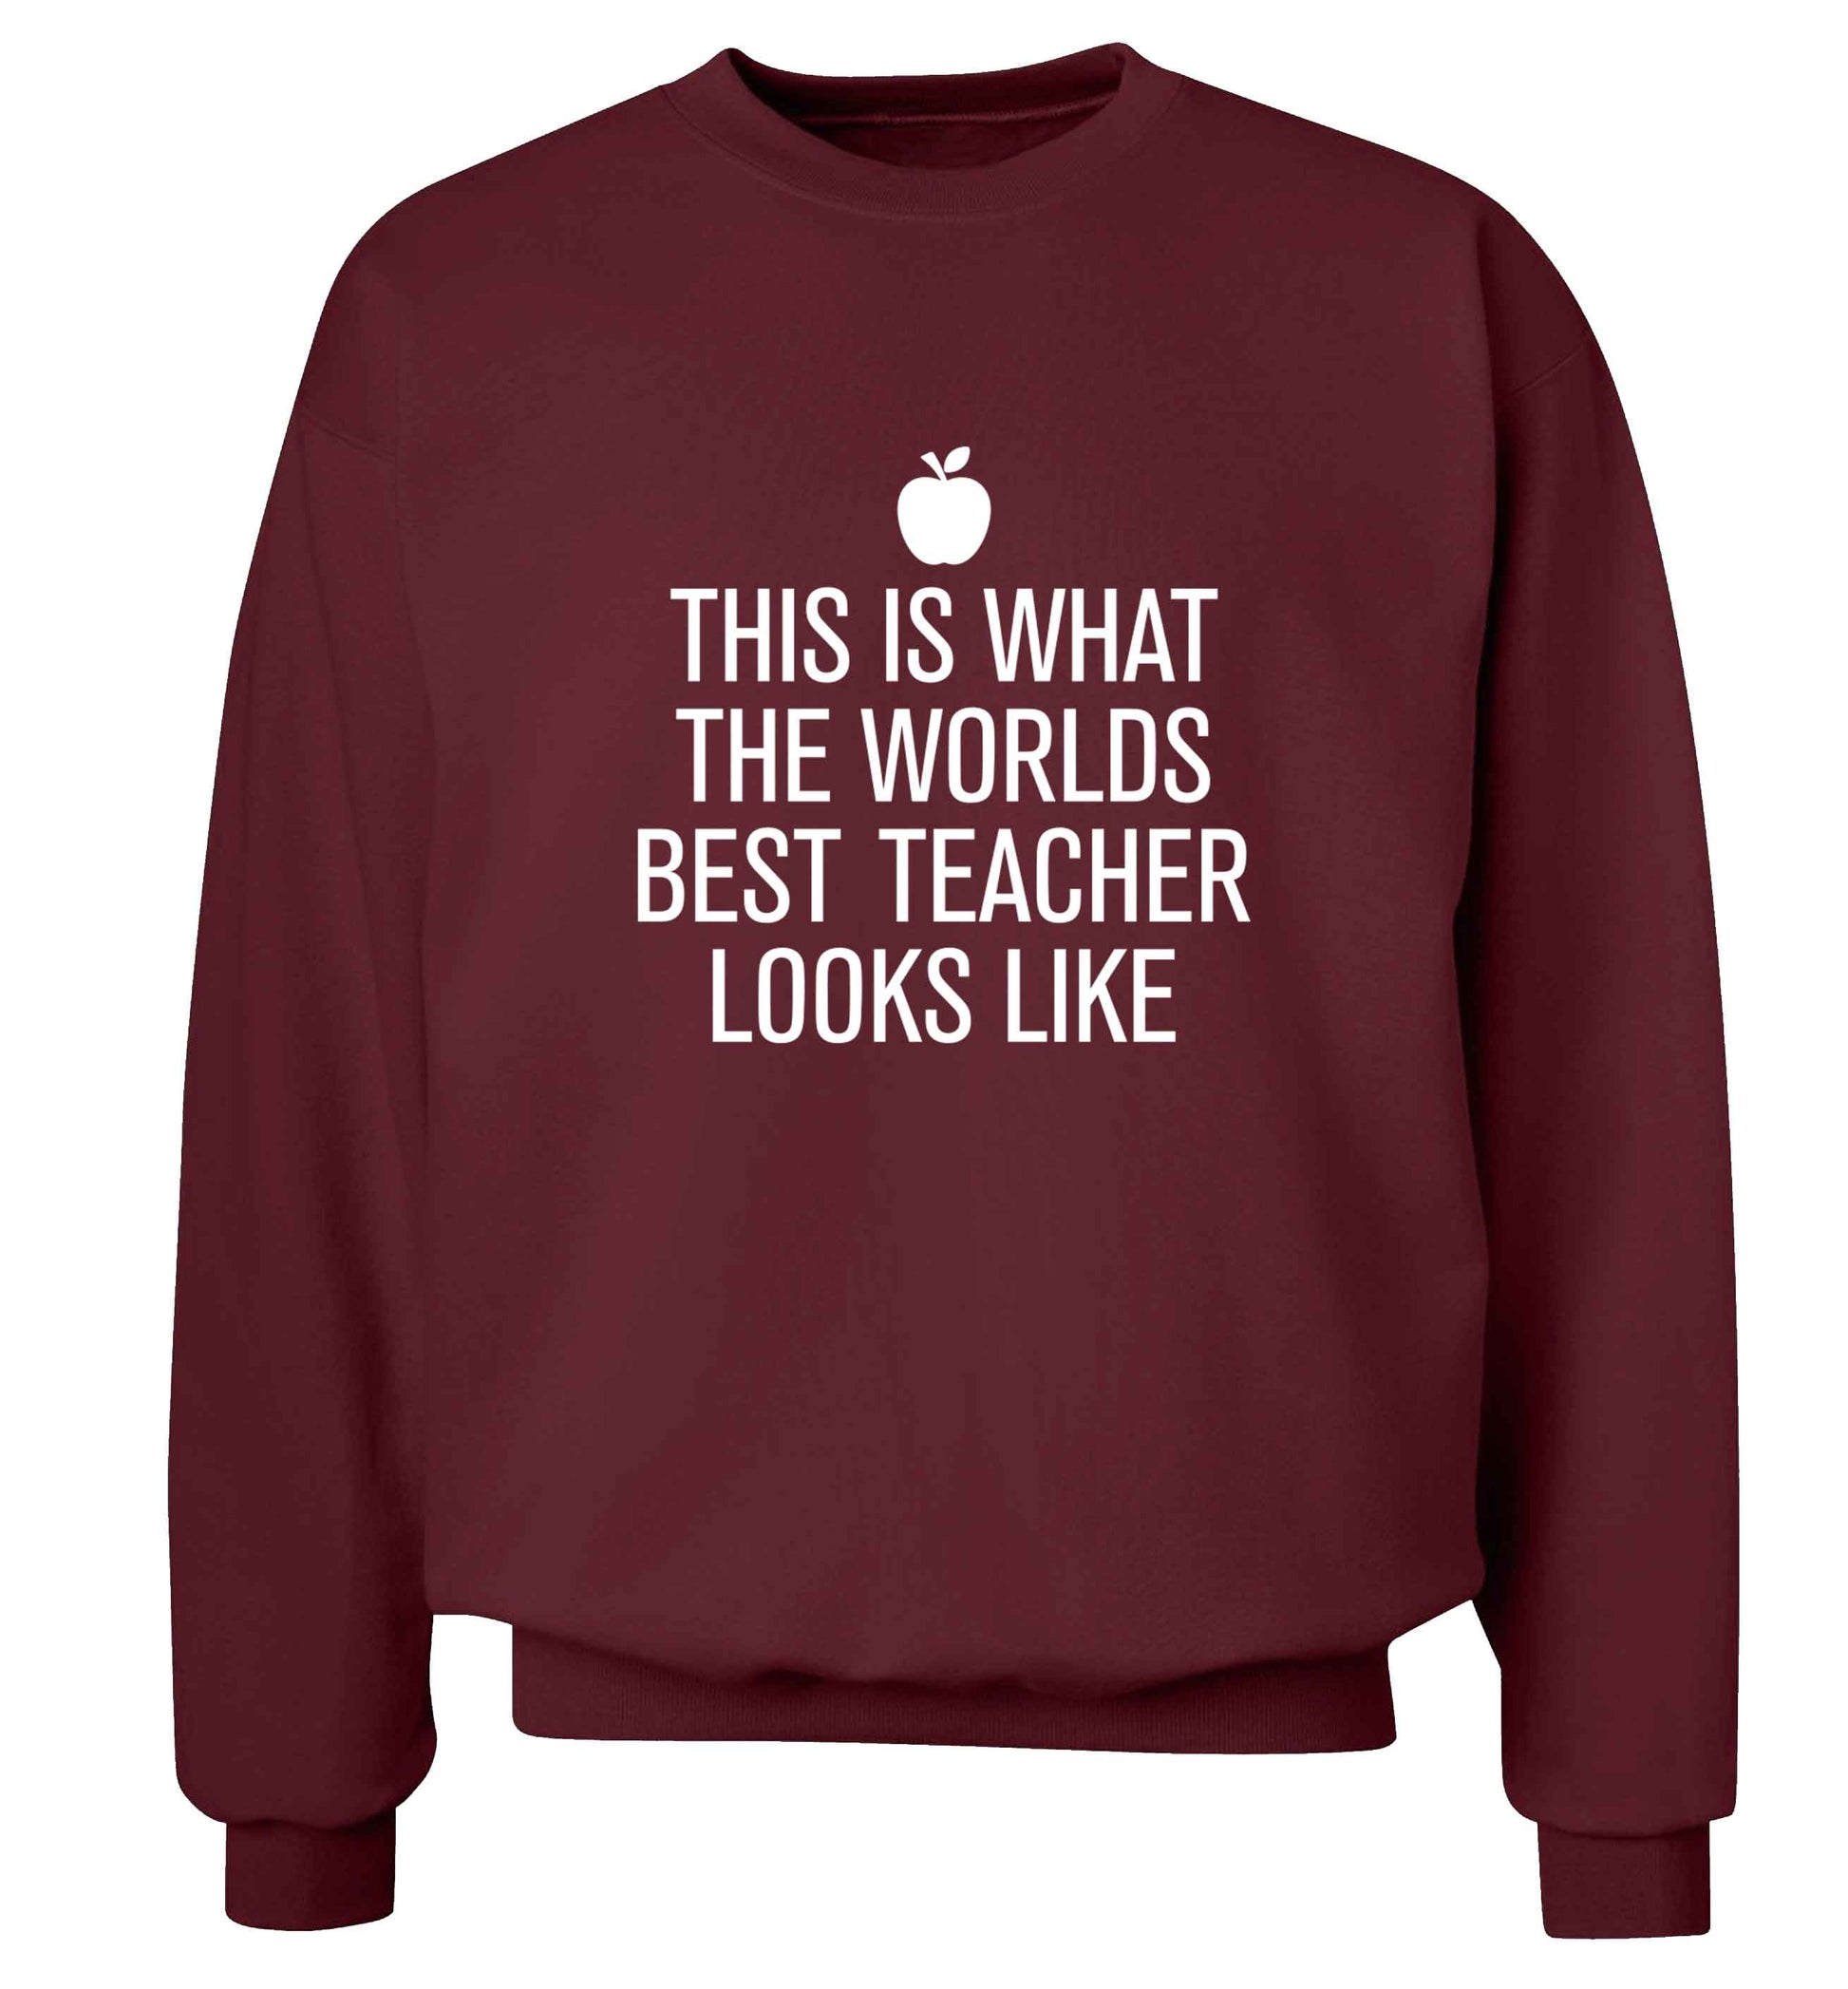 This is what the worlds best teacher looks like adult's unisex maroon sweater 2XL